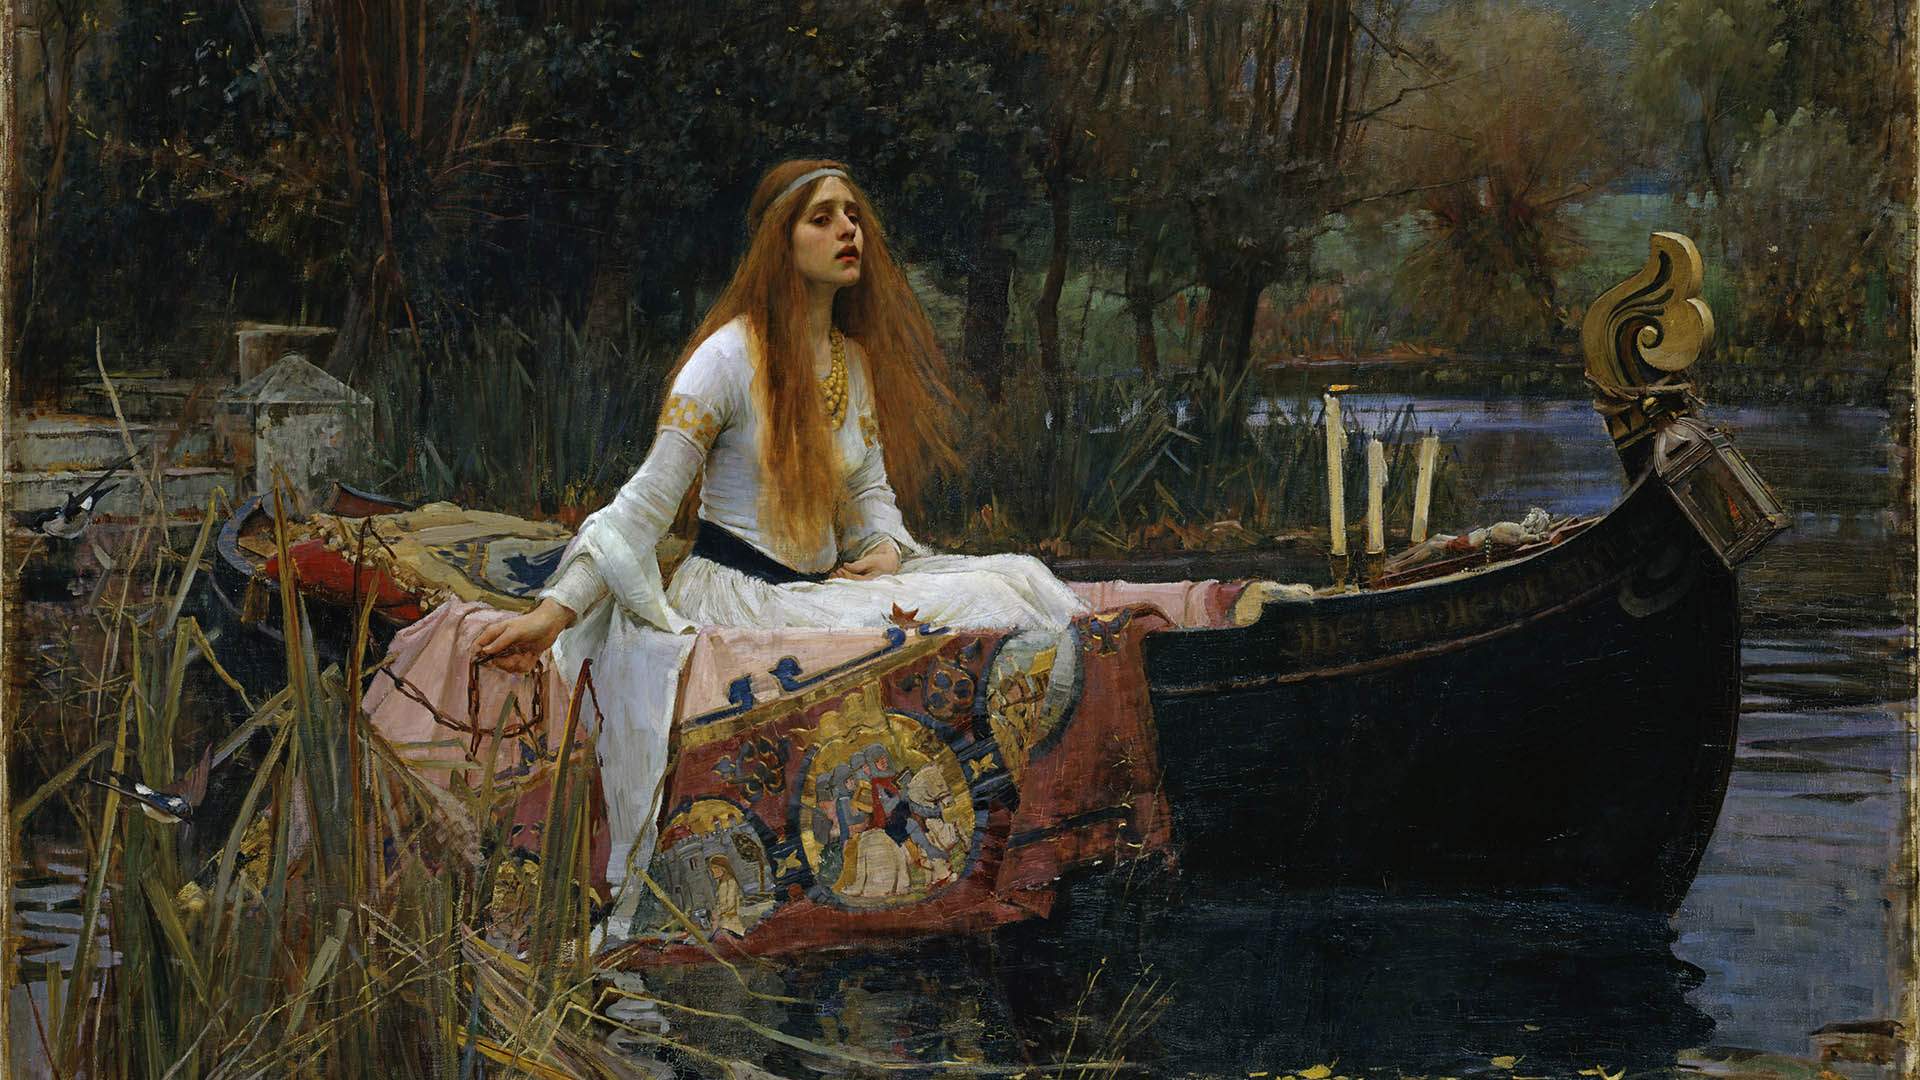 A Major Pre-Raphaelite Exhibition from the Tate Britain Is Coming to Australia